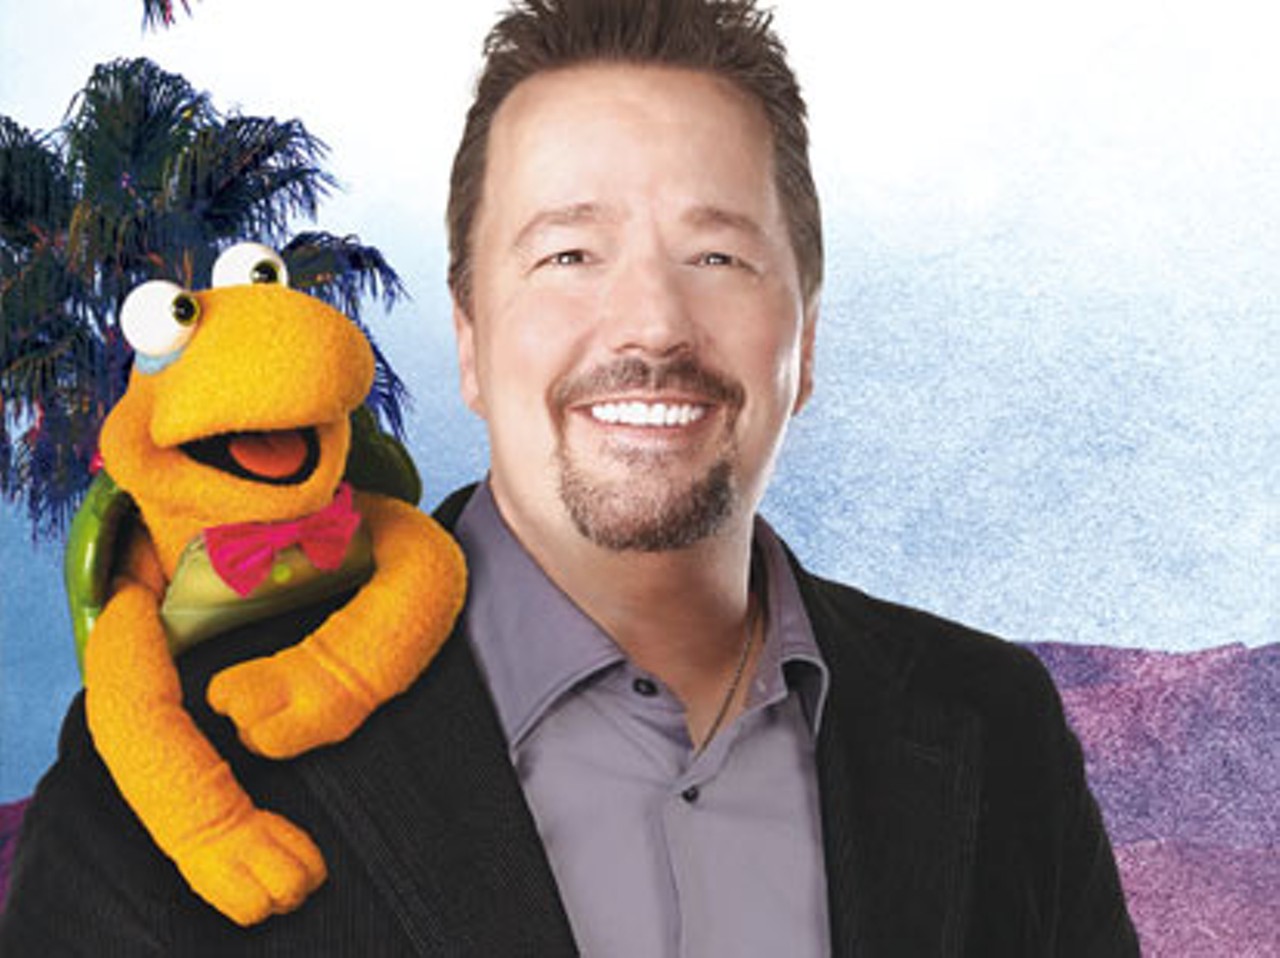  Terry Fator
Sun, March 5
Hard Rock Rocksino, 10705 Northfield Rd., Northfield, 330-908-7793
Ten years ago, ventriloquist Terry Fator won Season 2 of the reality TV show America's Got Talent. That victory launched a successful career, and Fator now holds down a residency in Vegas. Combining singing and ventriloquism, Fator gives his various puppets distinctive personalities, distinguishing the live show as a result. He performs tonight at 7:30 at Hard Rock Live. Tickets are $49.50 to $85. (Niesel)
Photo Provided